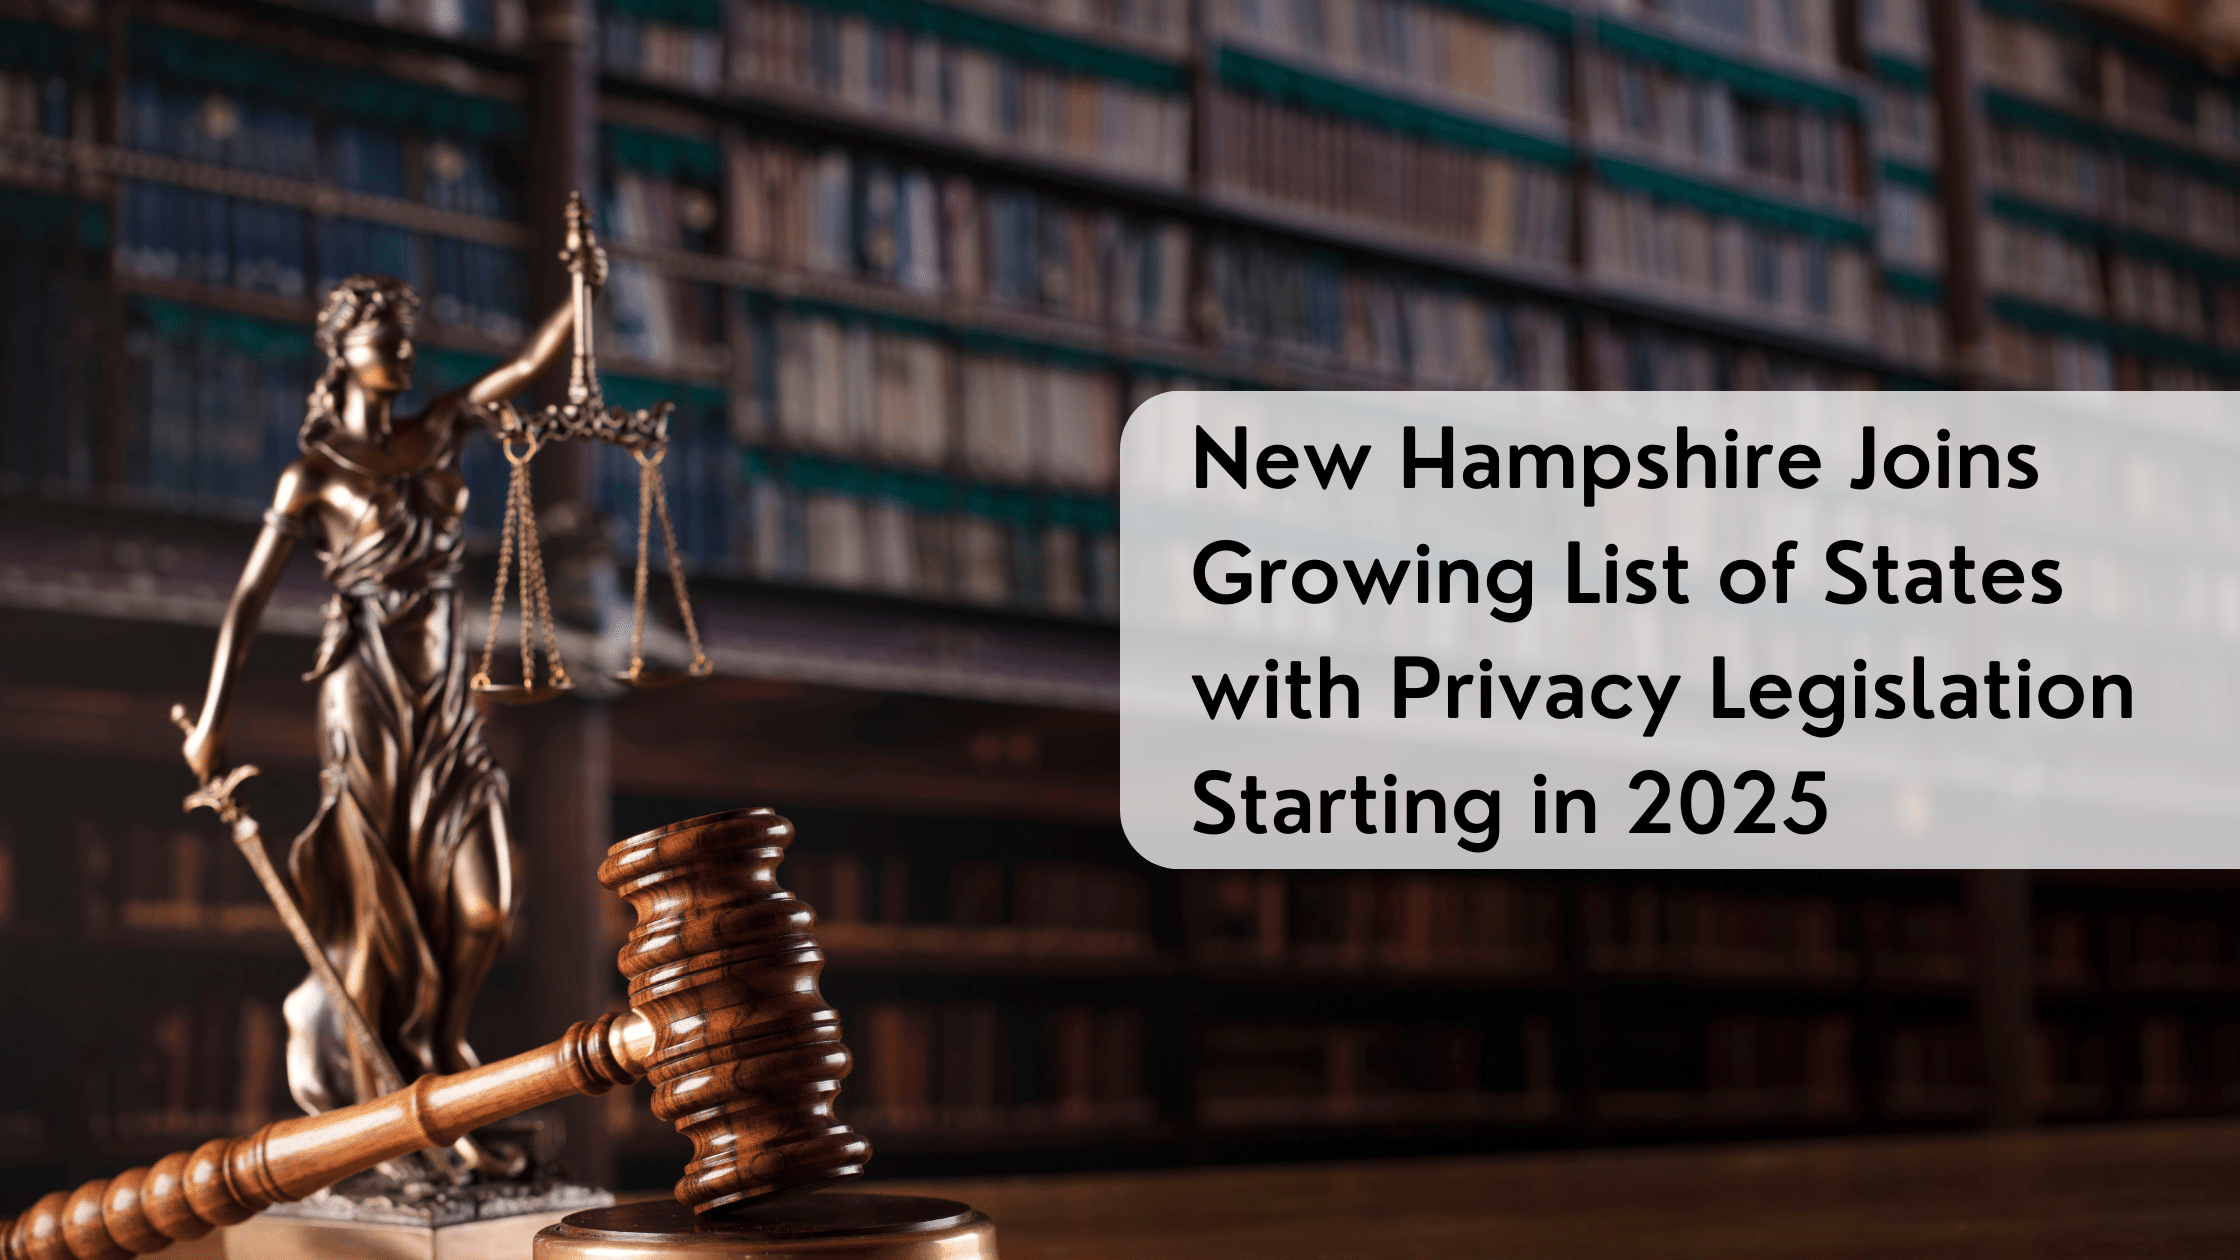 New Hampshire Joins Growing List of States with Privacy Legislation Starting in 2025